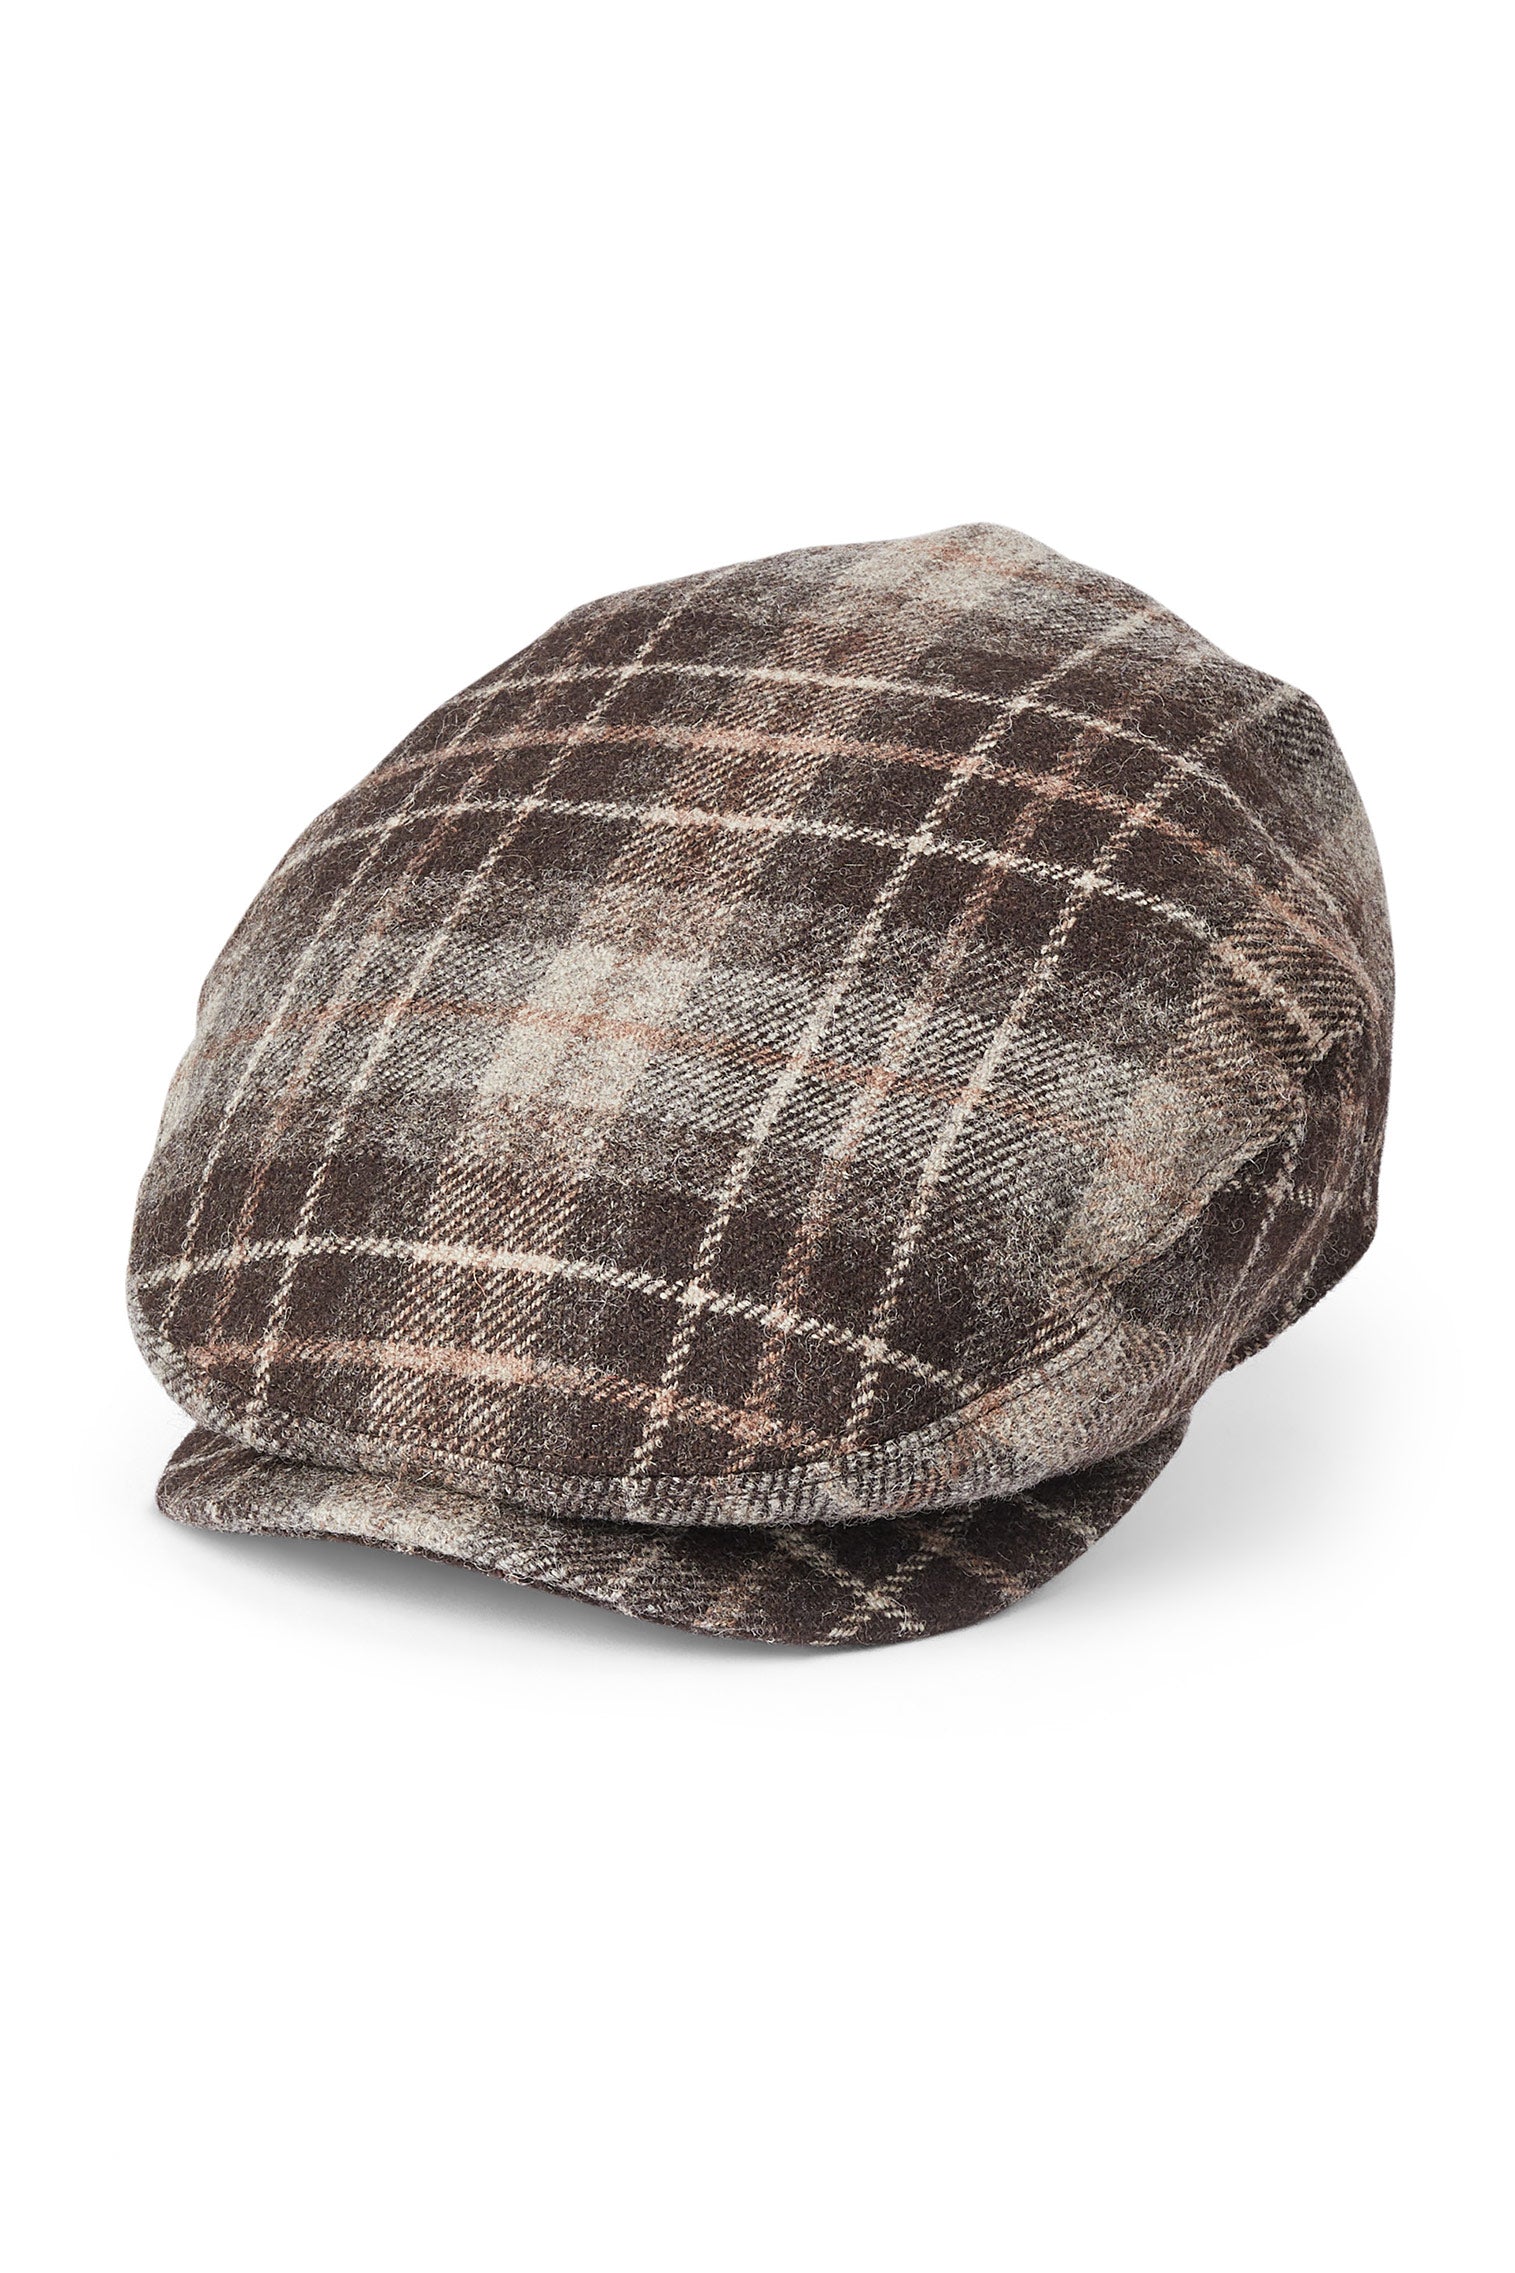 Turnberry Plaid Flat Cap - Hats for Tall People - Lock & Co. Hatters London UK